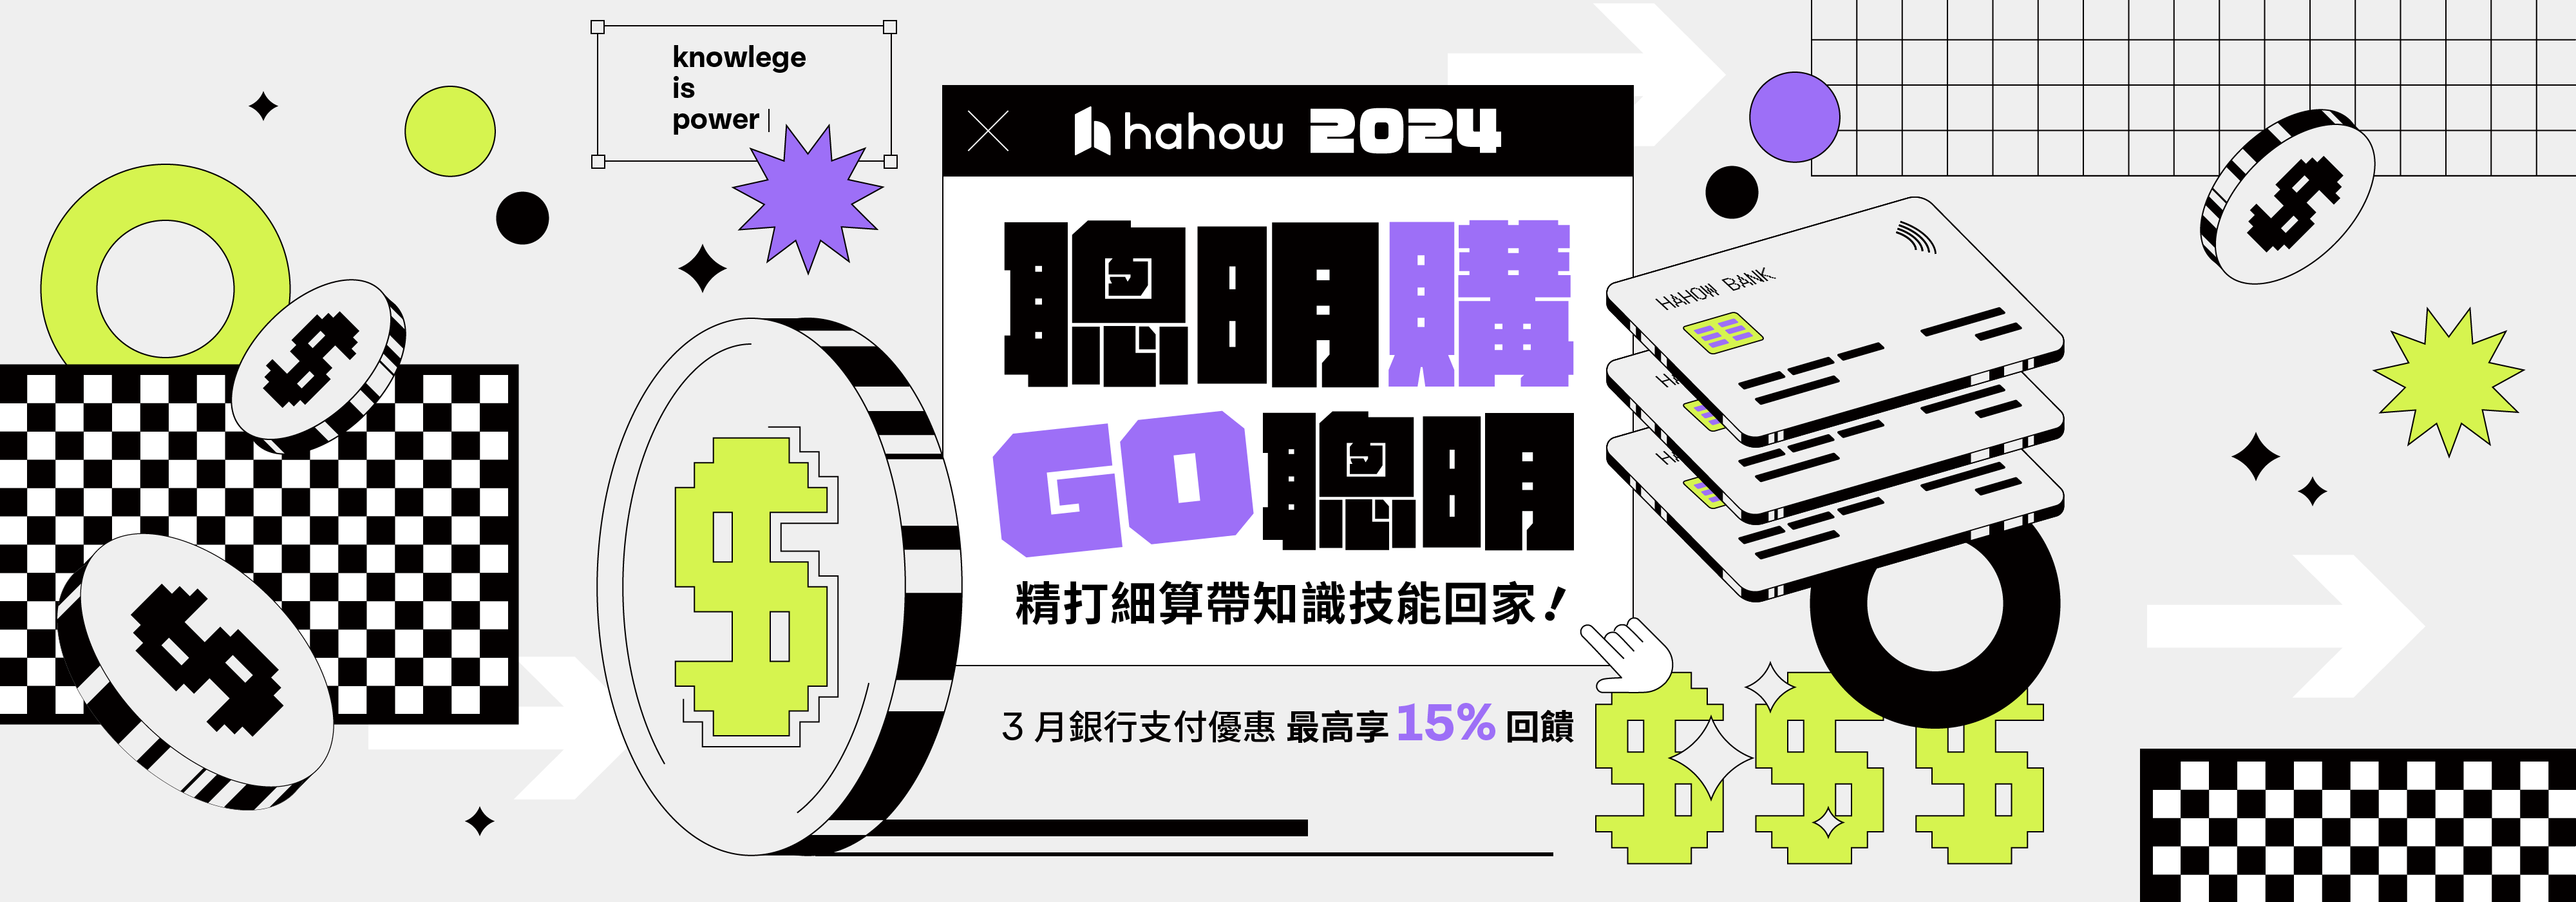 Hahow 信用卡優惠